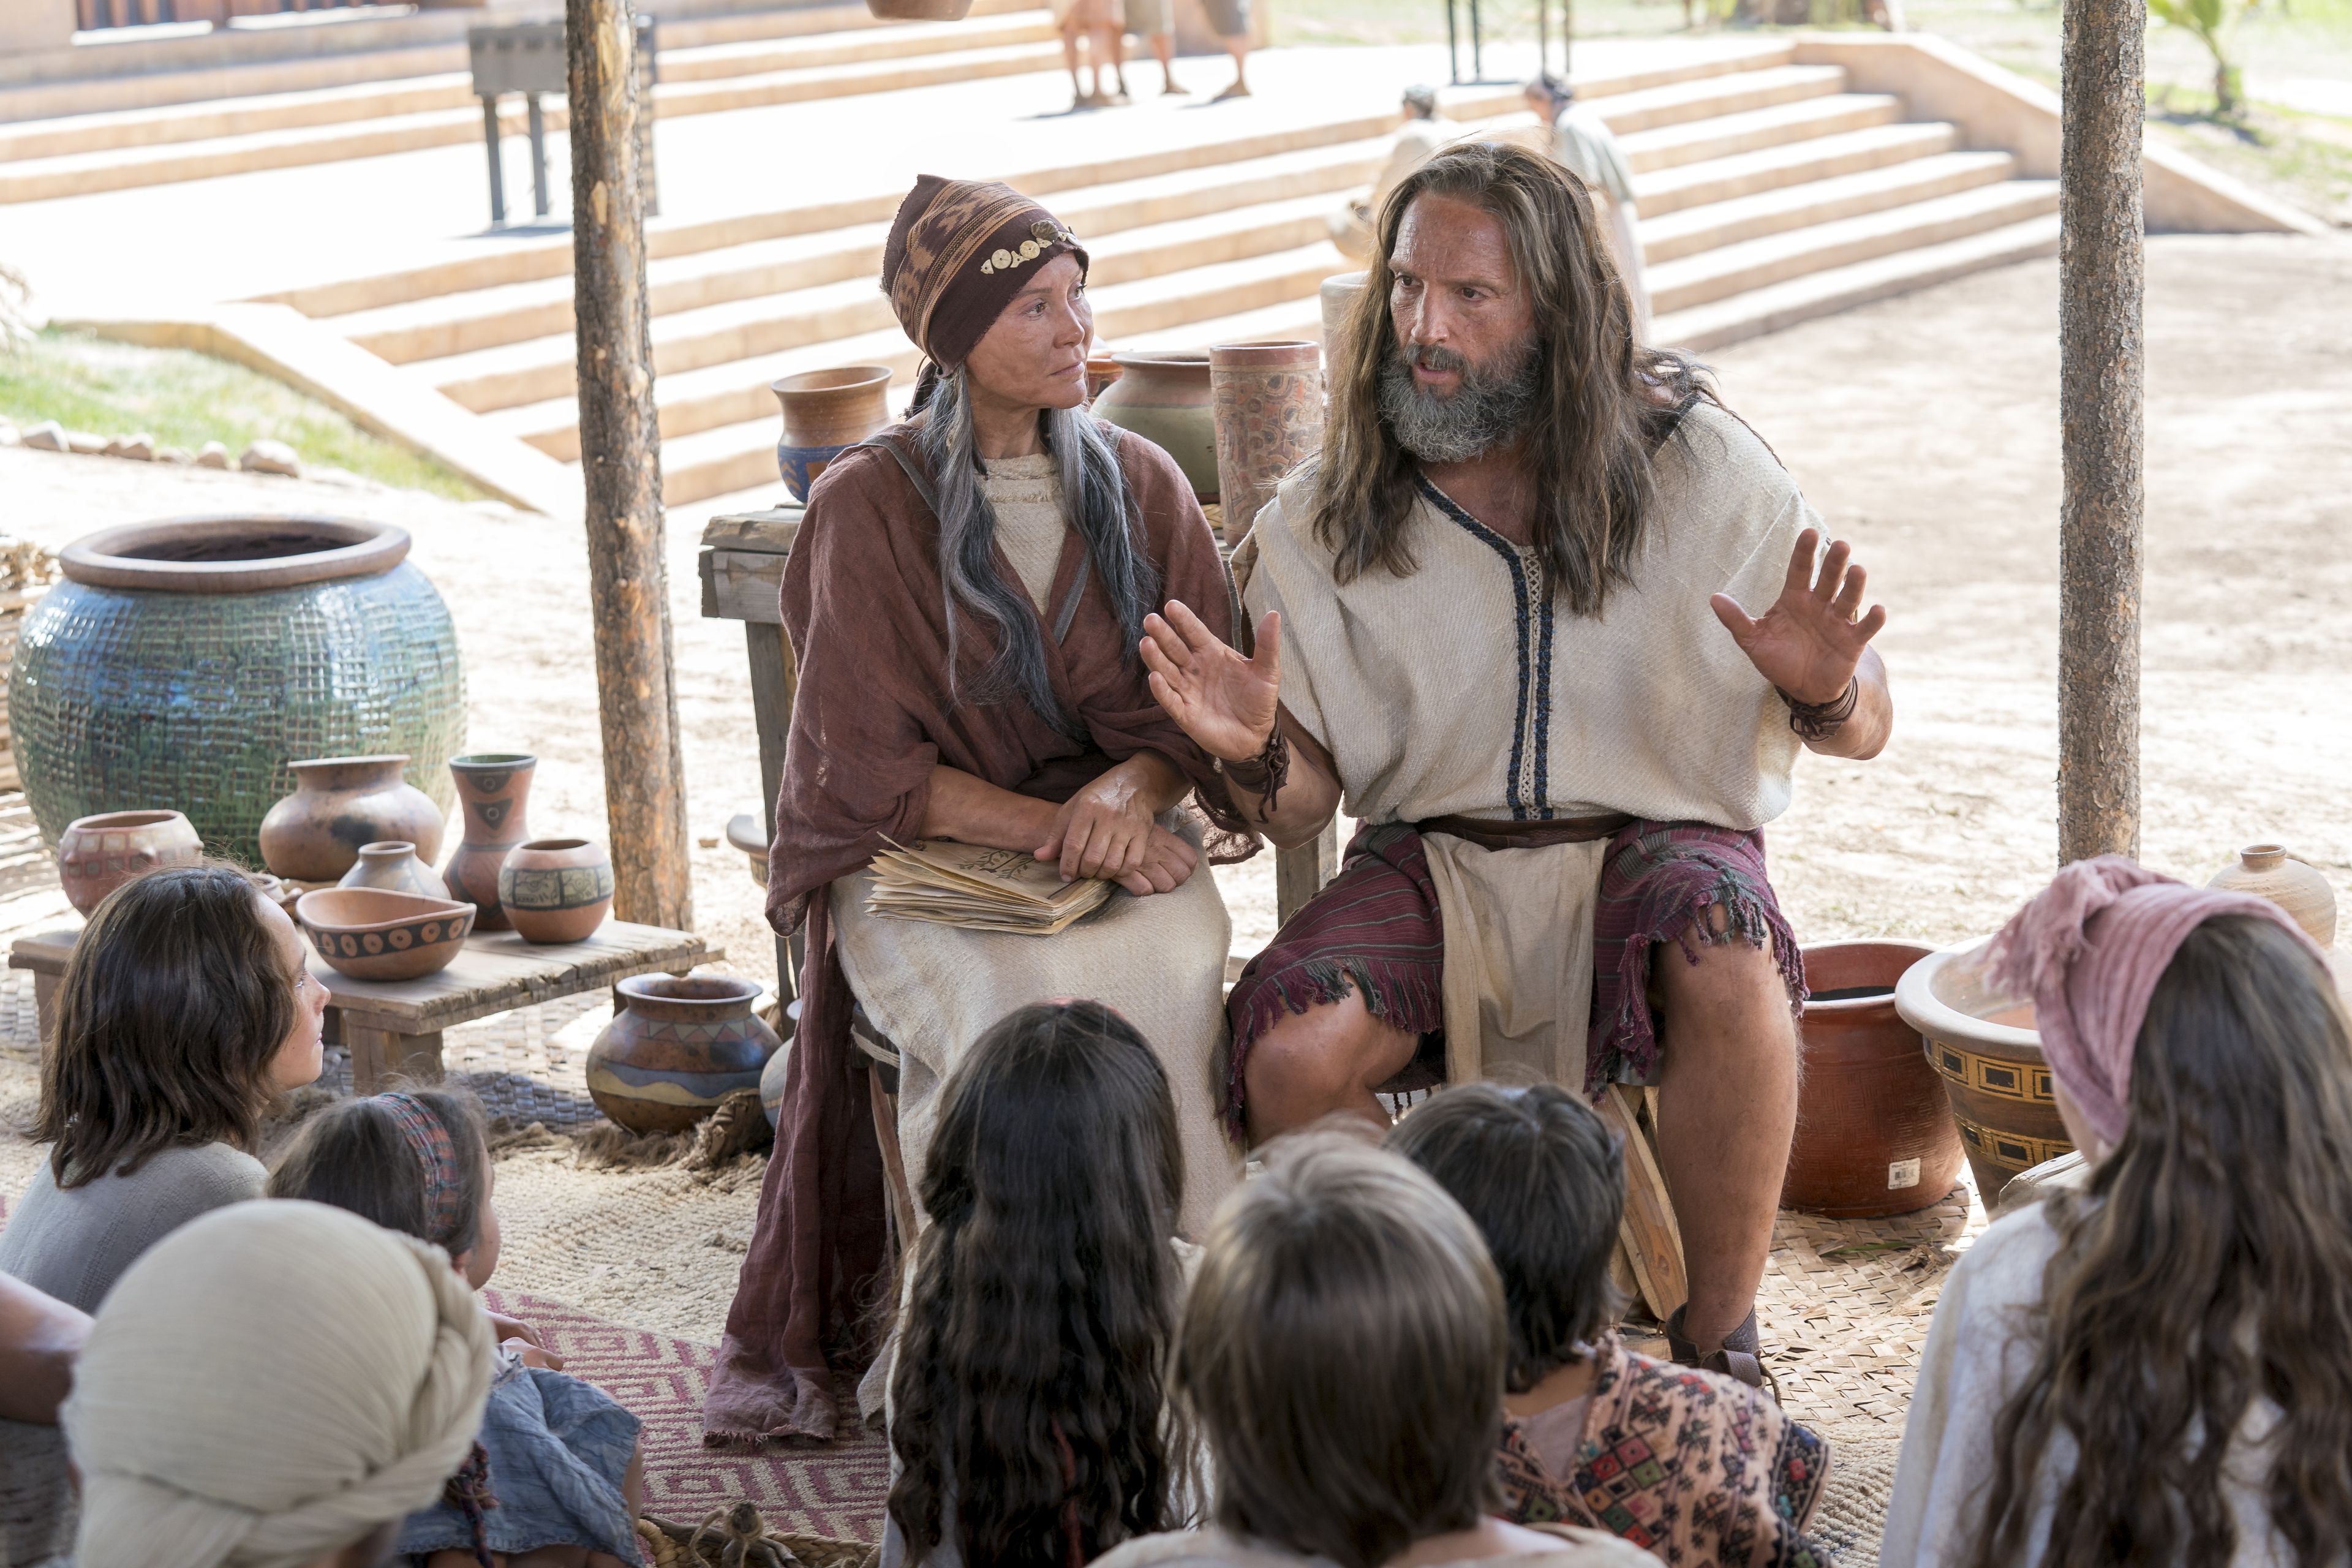 Nephi teaches children about baptism and the doctrine of Christ.